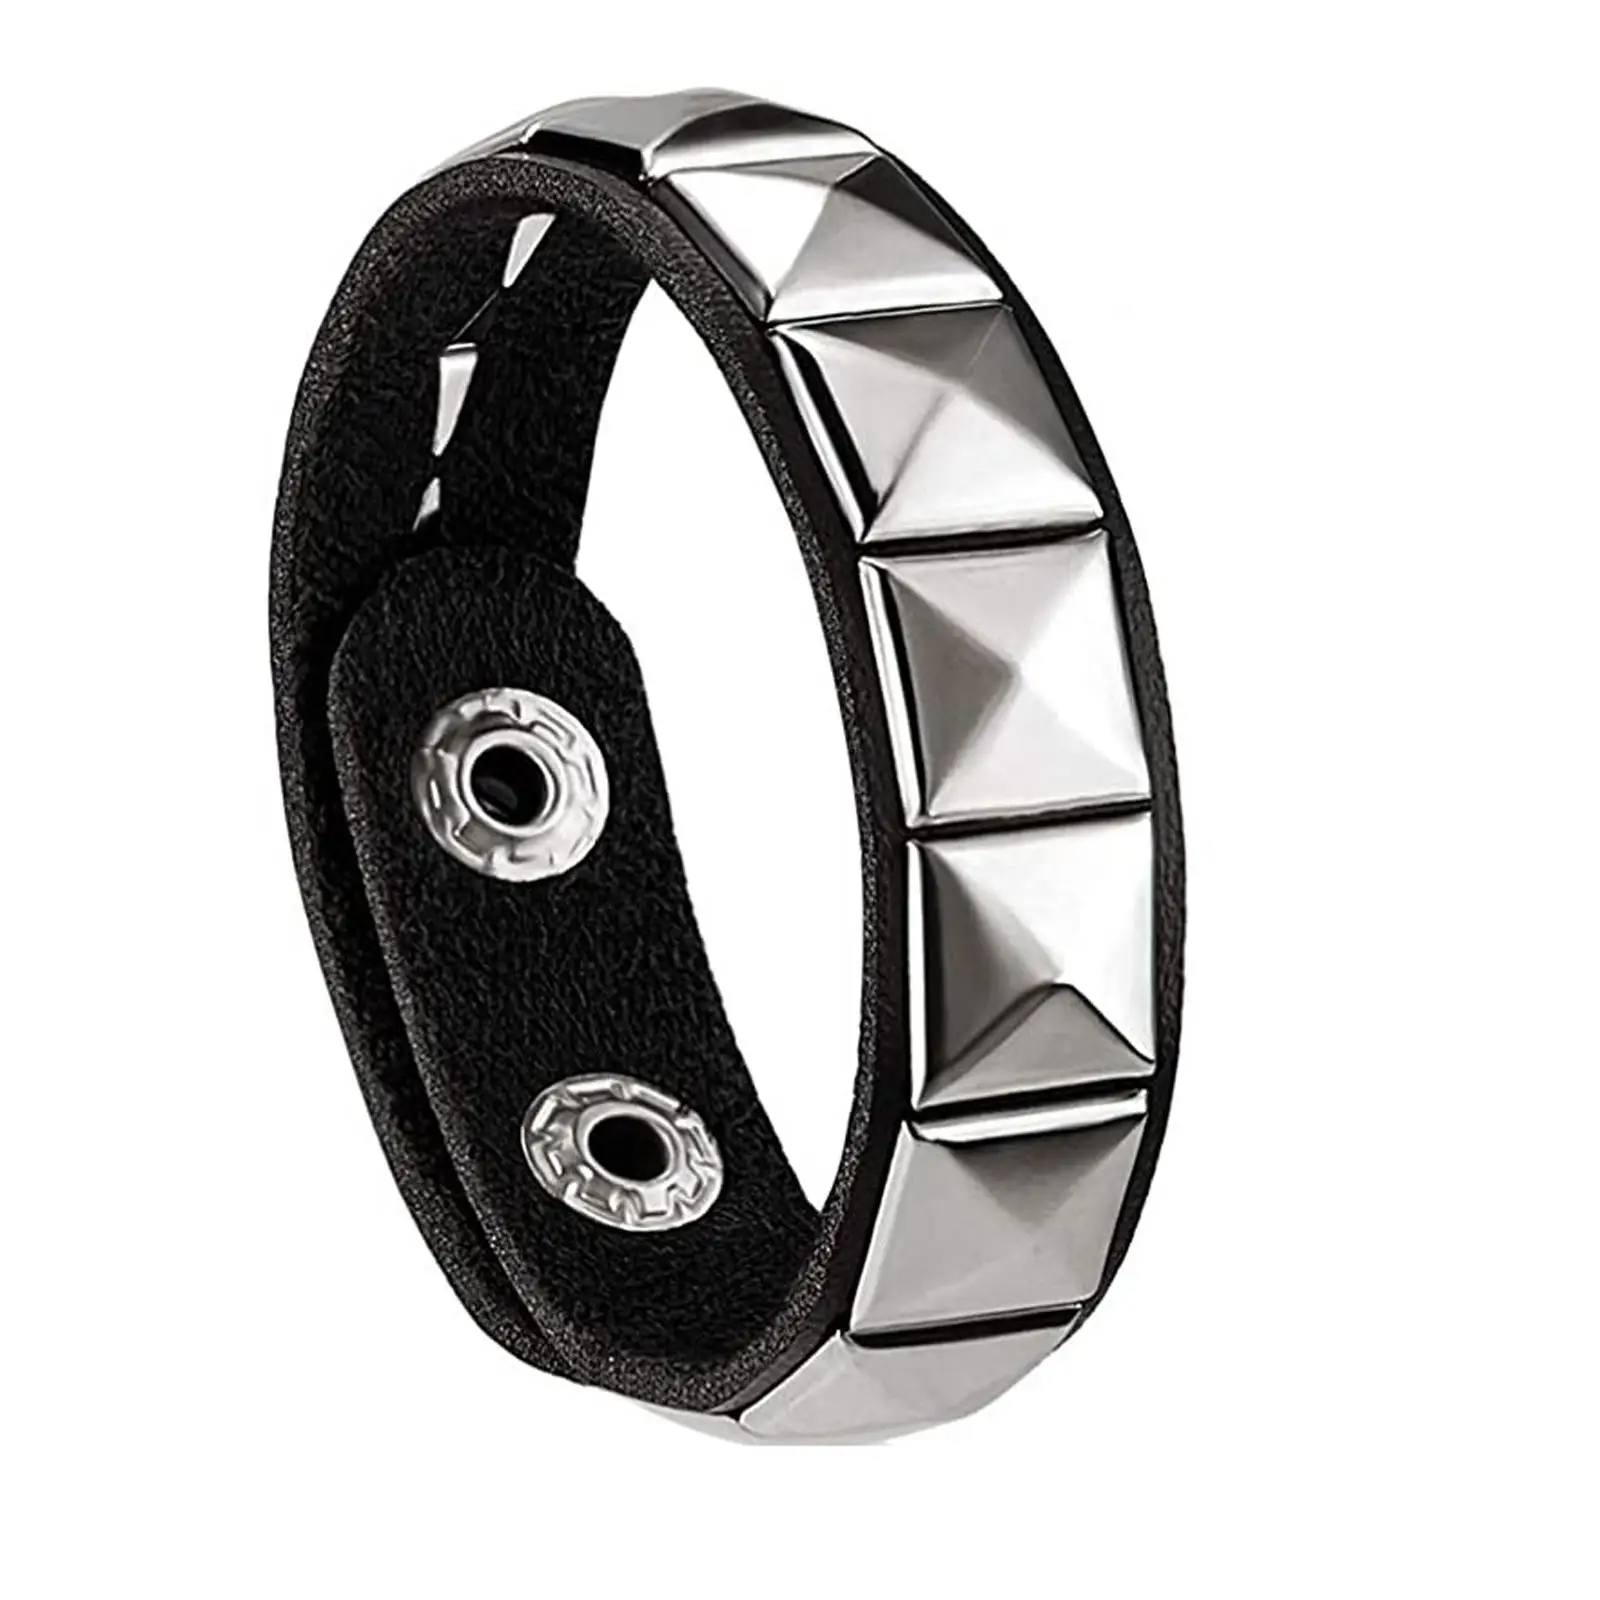 3Pcs Gothic Studded Punk Bracelet for Men Armband Fashion Pyramid Wristband for Party Proms Jewelry Cosplay Costume Multi Layers